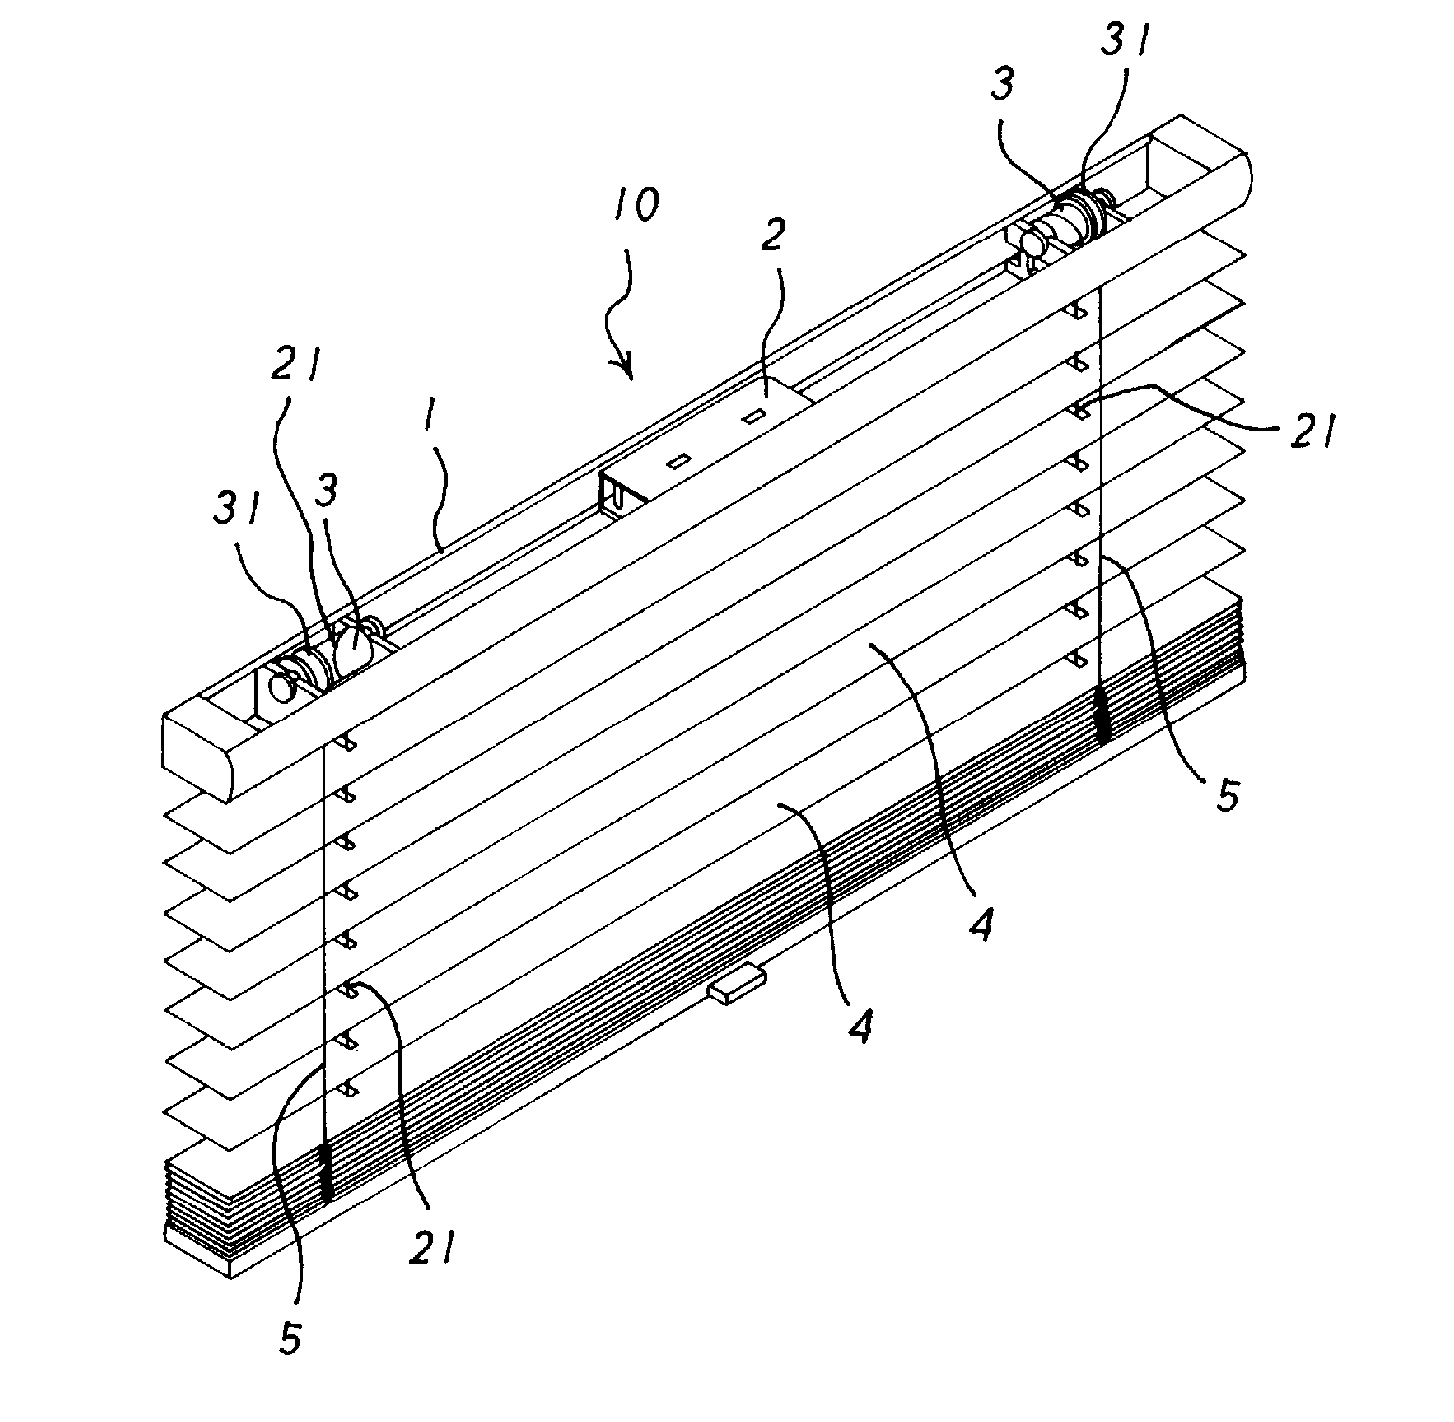 Adjusting structure of a curtain for adjusting the angle of curtain blade